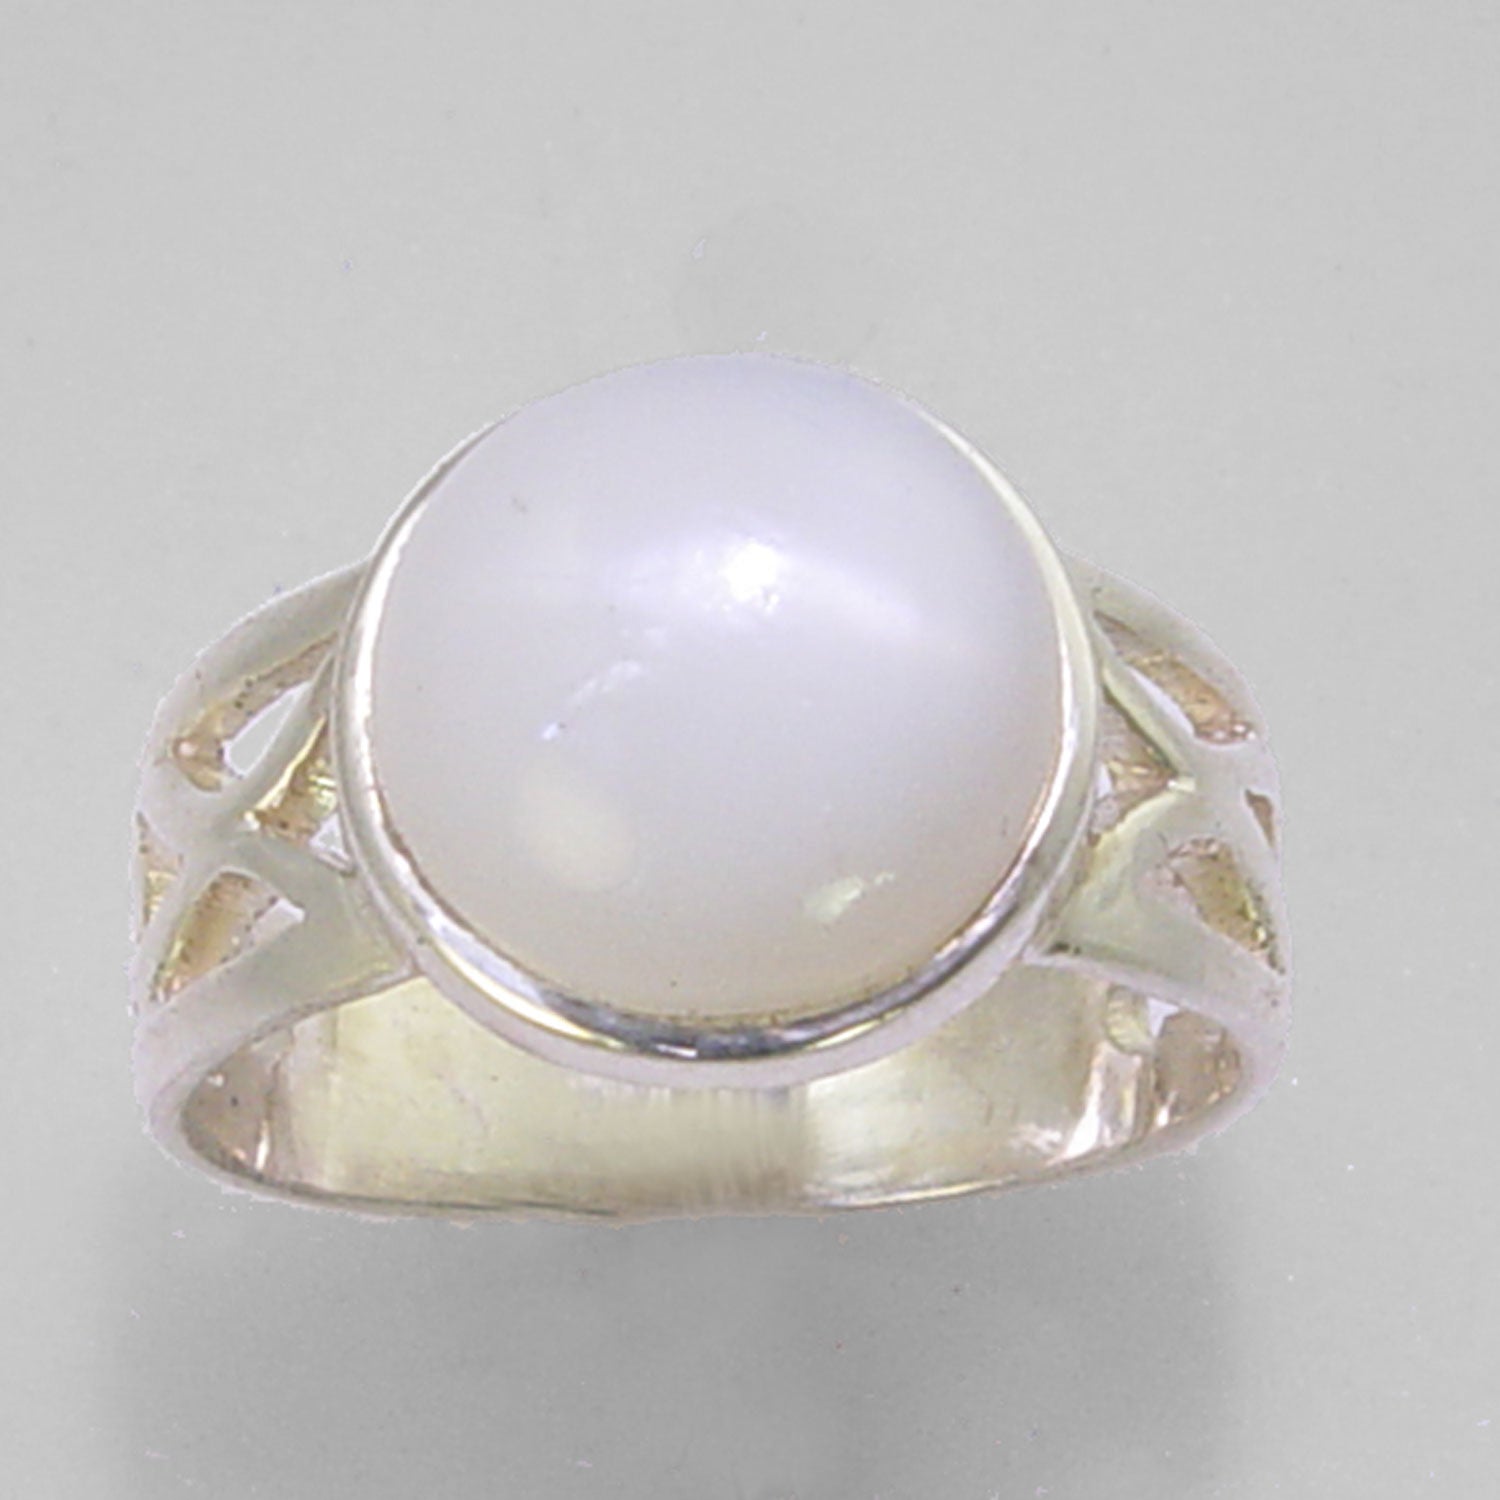 Moonstone Cat's Eye 4.35 ct Round Cab Sterling Silver Ring, Size 7